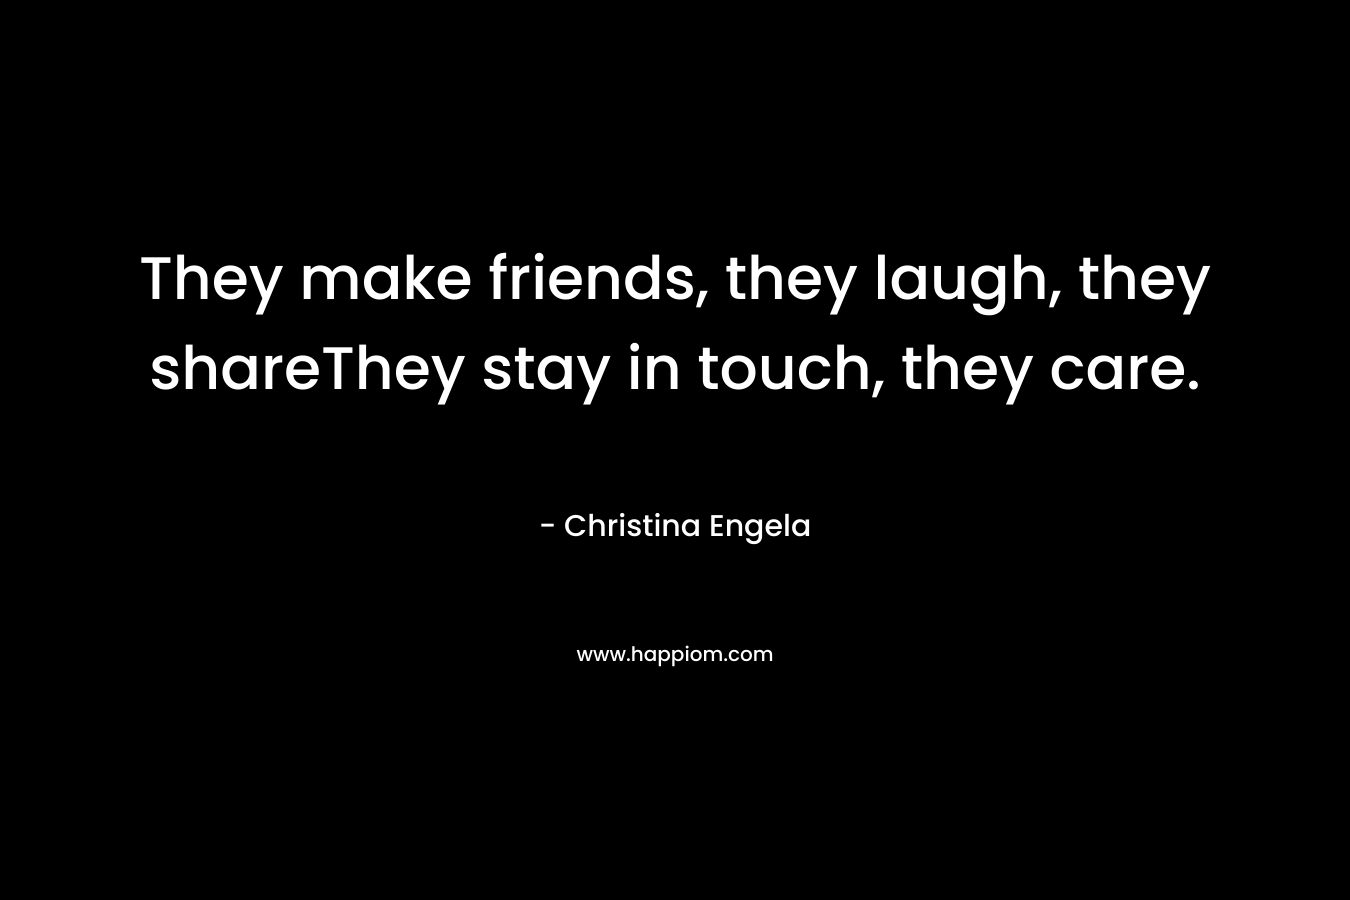 They make friends, they laugh, they shareThey stay in touch, they care. – Christina Engela